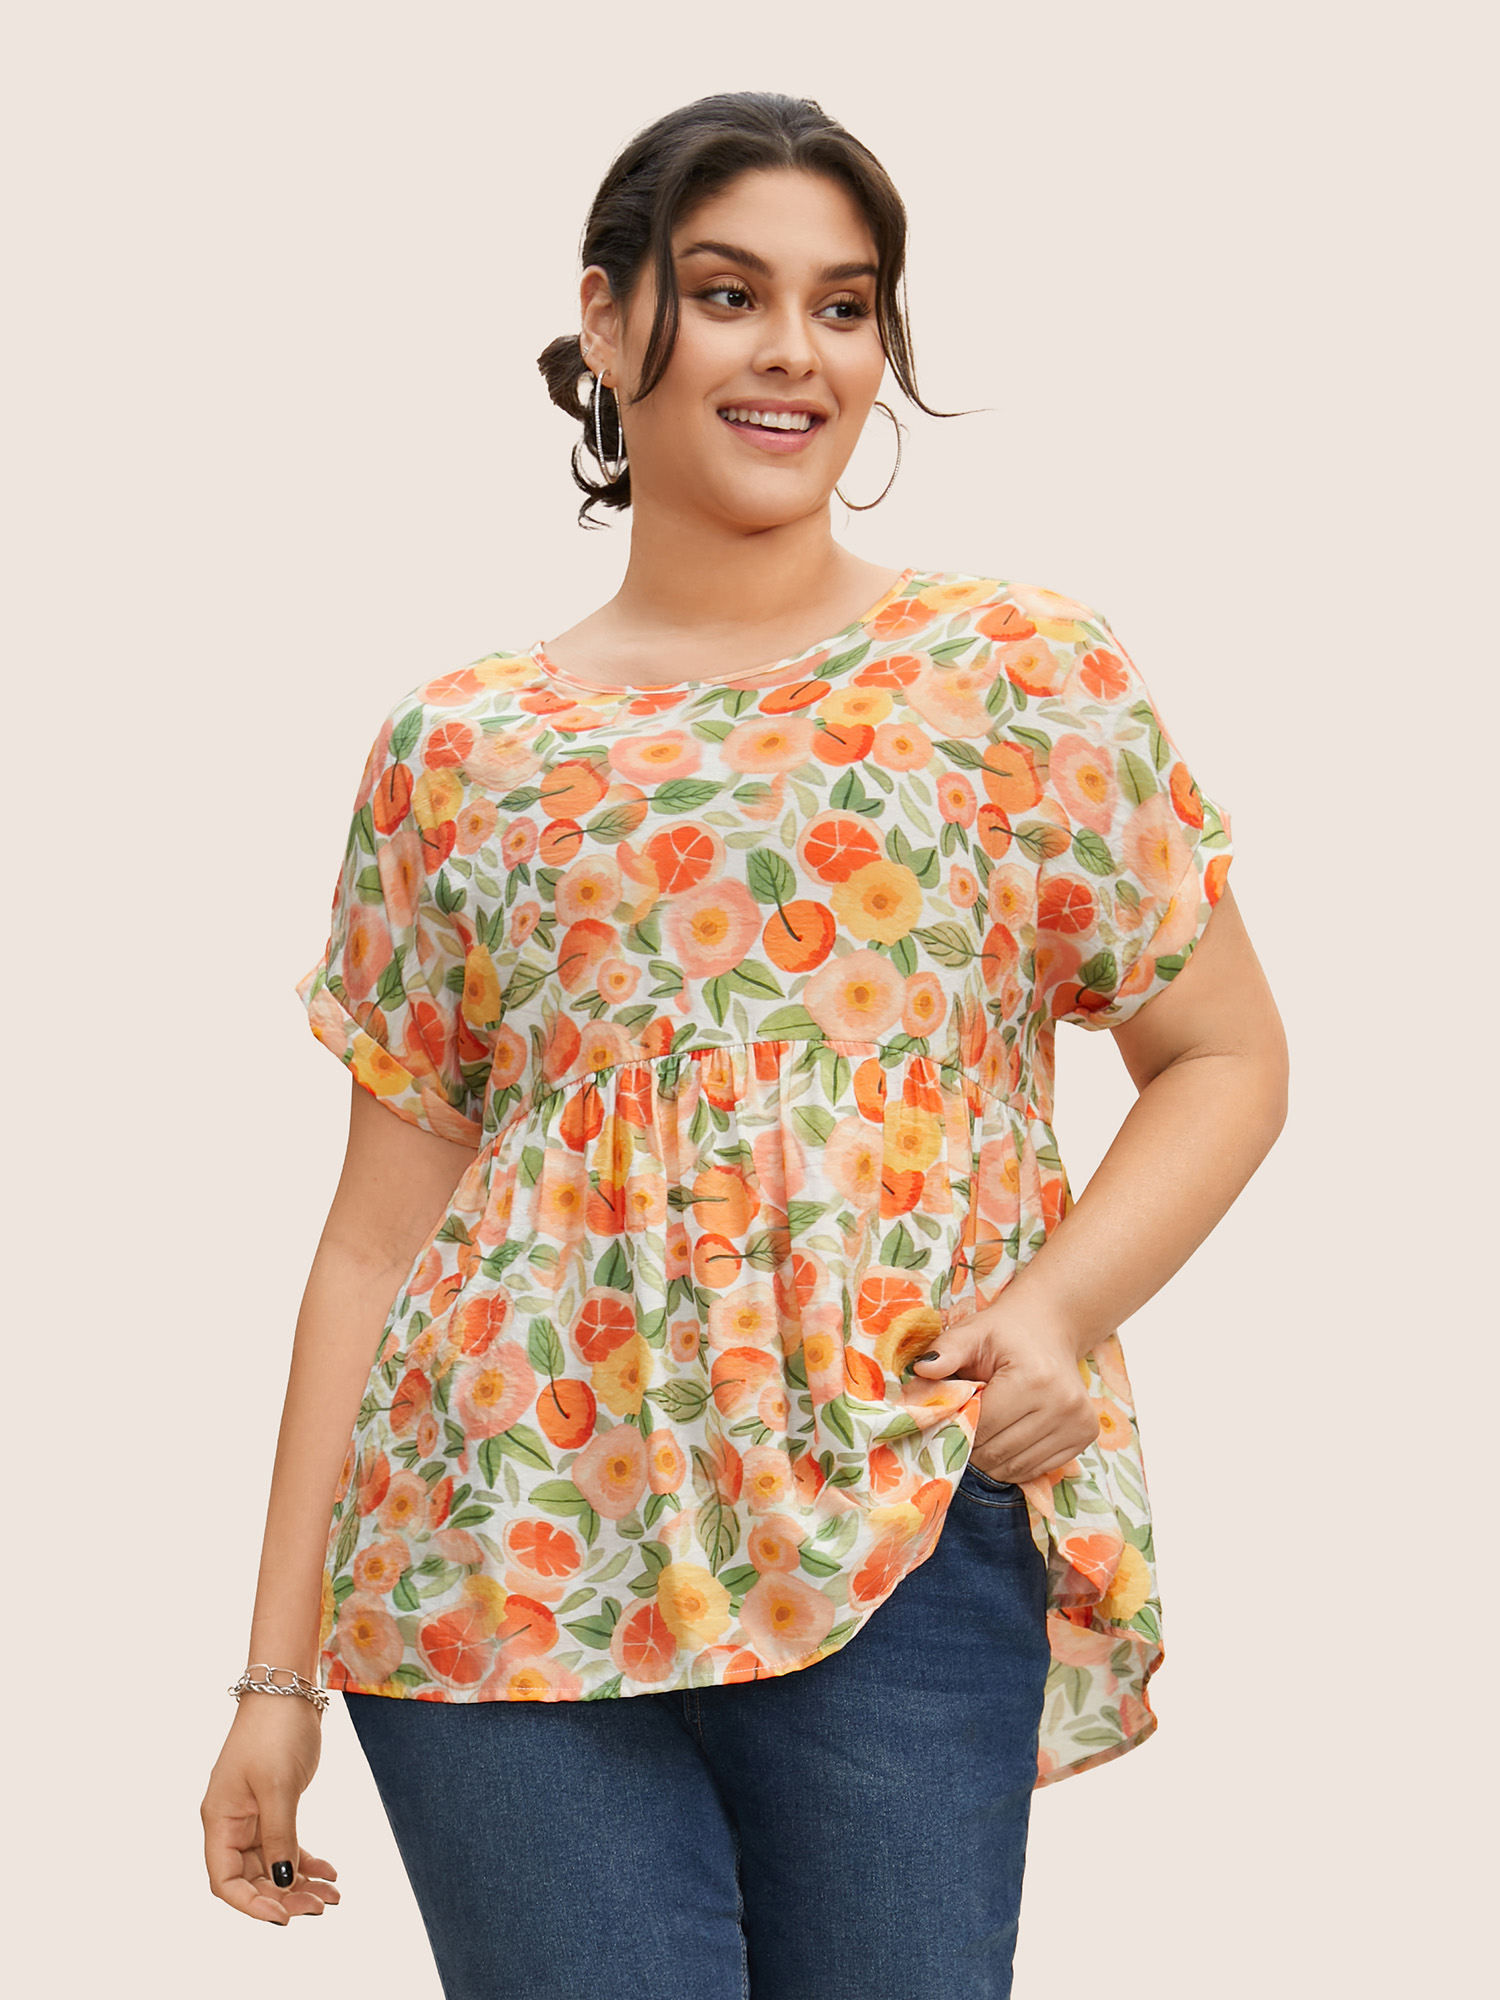 

Plus Size Salmon Fruit Print Curved Hem Batwing Sleeve Blouse Women Casual Cap Sleeve Round Neck Everyday Blouses BloomChic